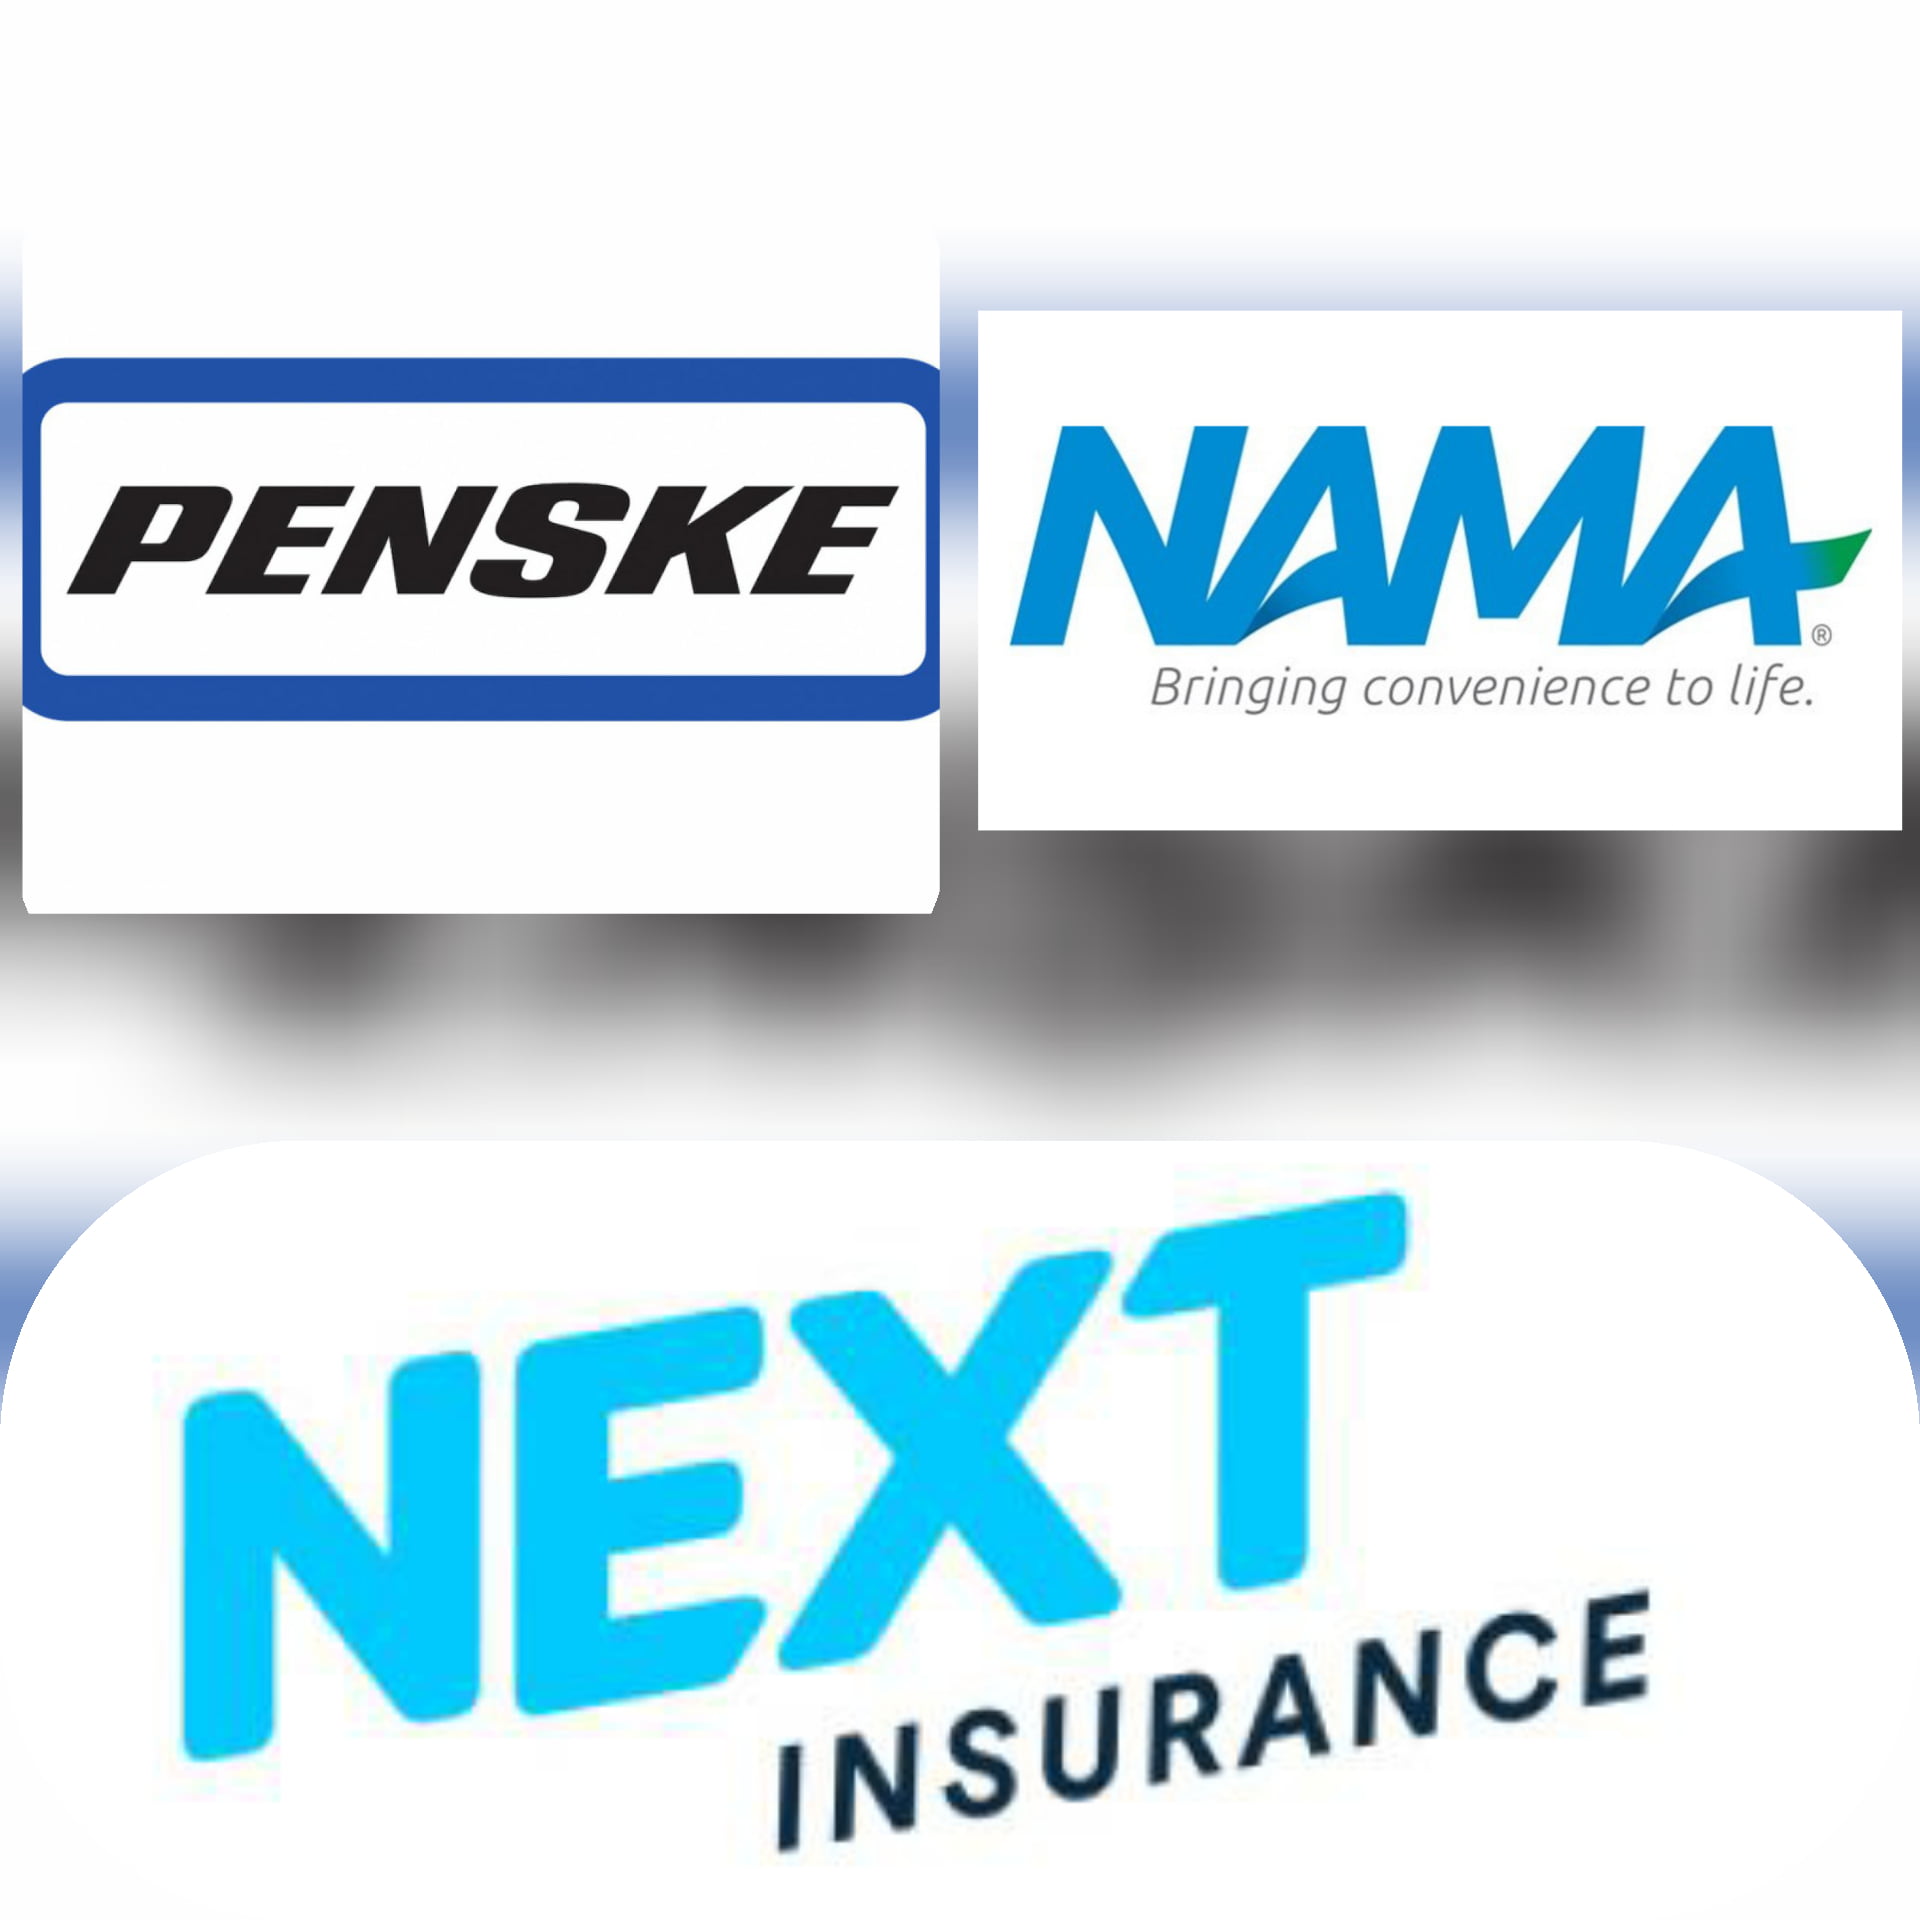 Penske, NAMA, and Next Insurance covers DEAJ Investments activities